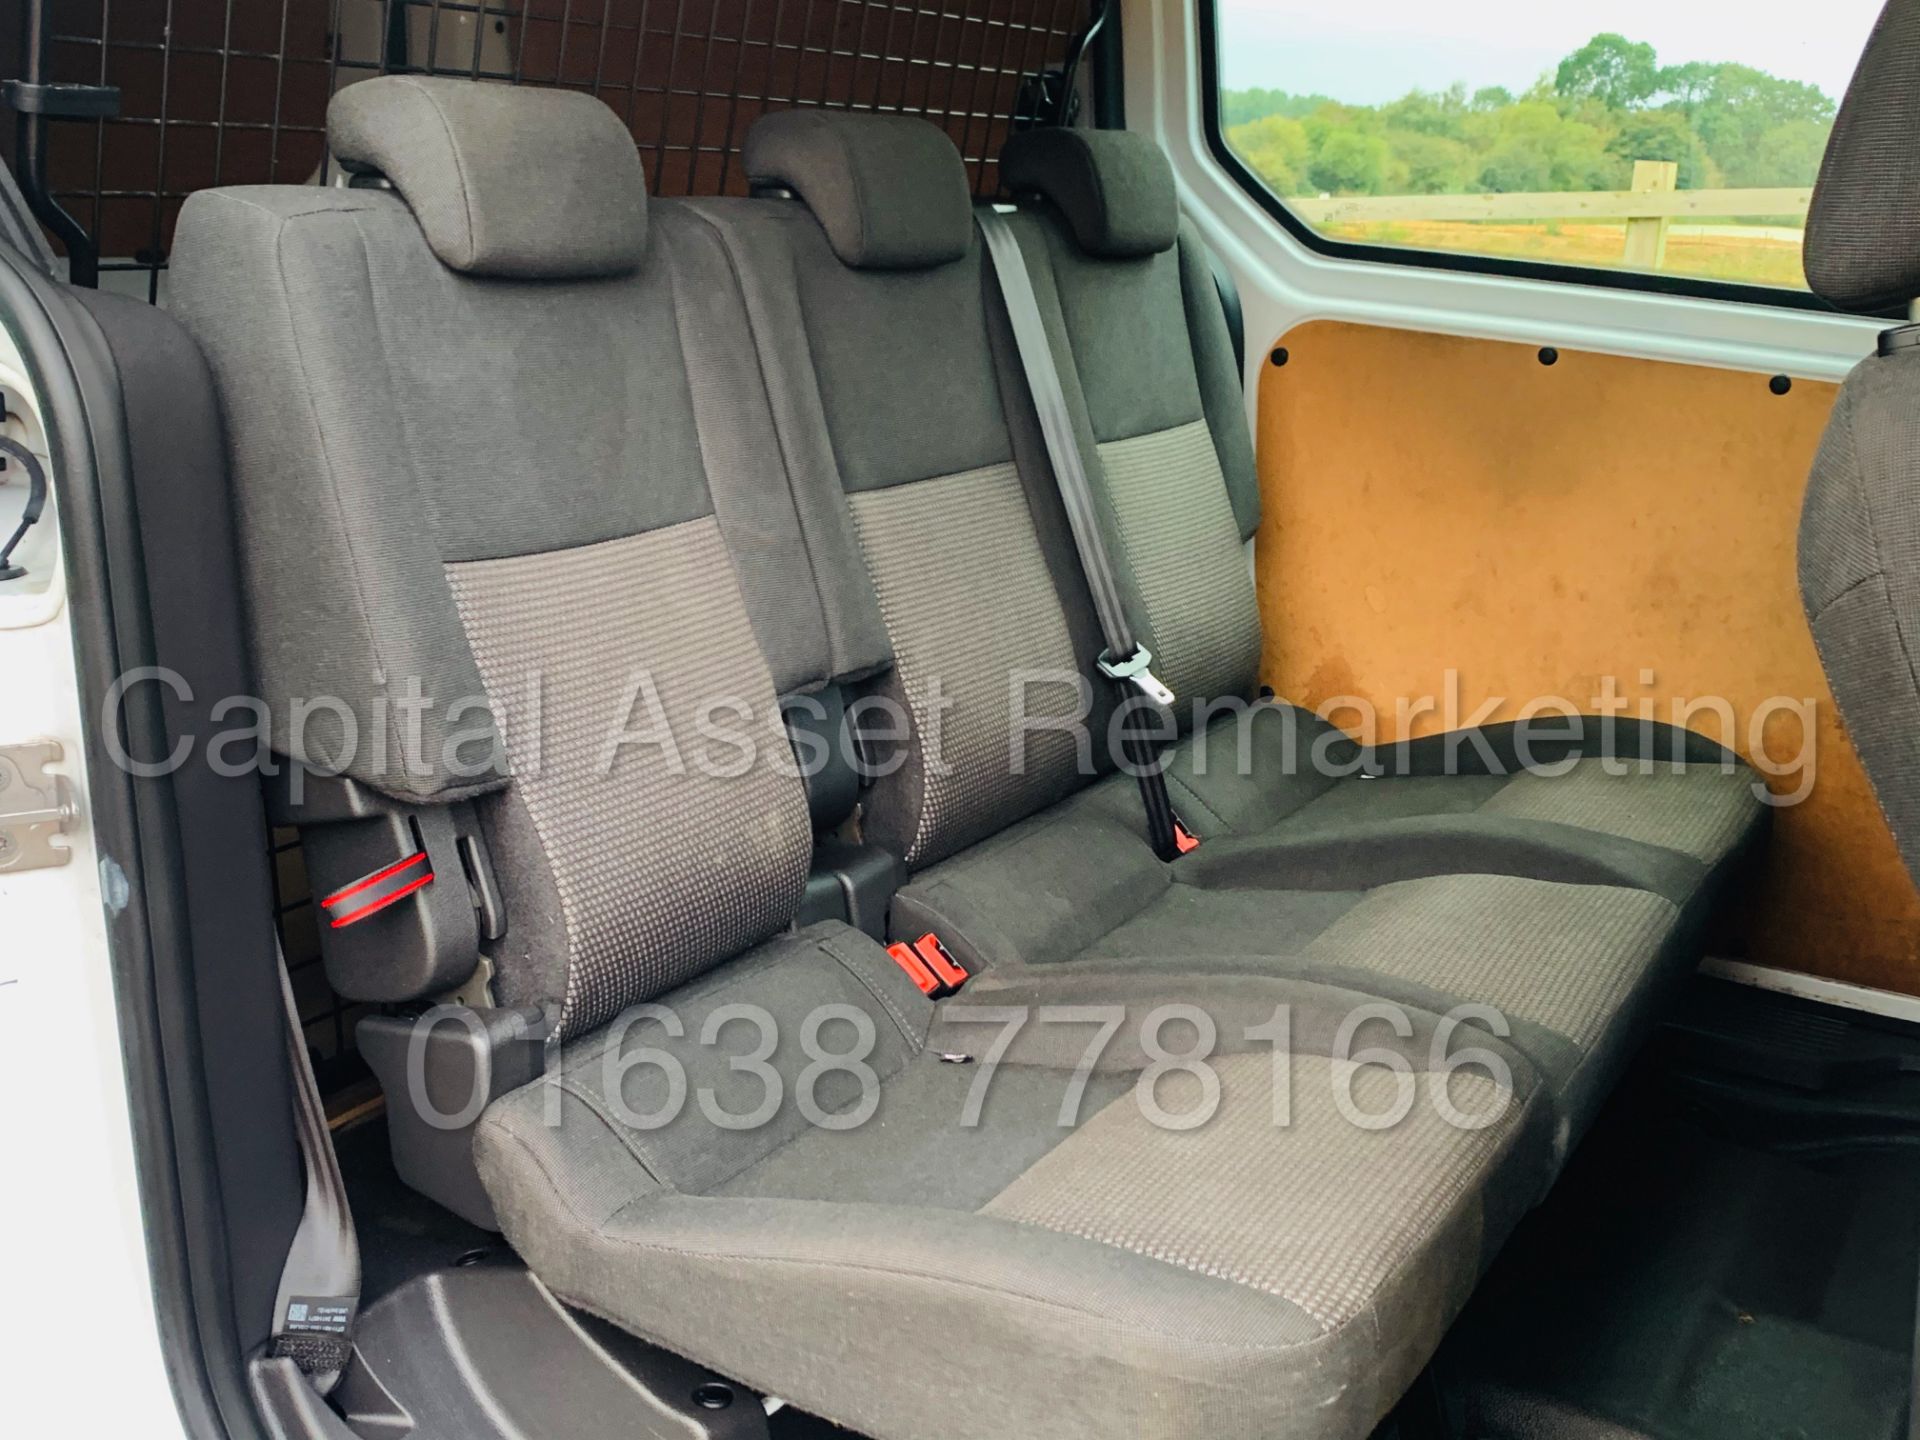 ON SALE FORD TRANSIT CONNECT *LWB- 5 SEATER CREW VAN* (2018 - EURO 6) 1.5 TDCI *AIR CON* (1 OWNER) - Image 28 of 45